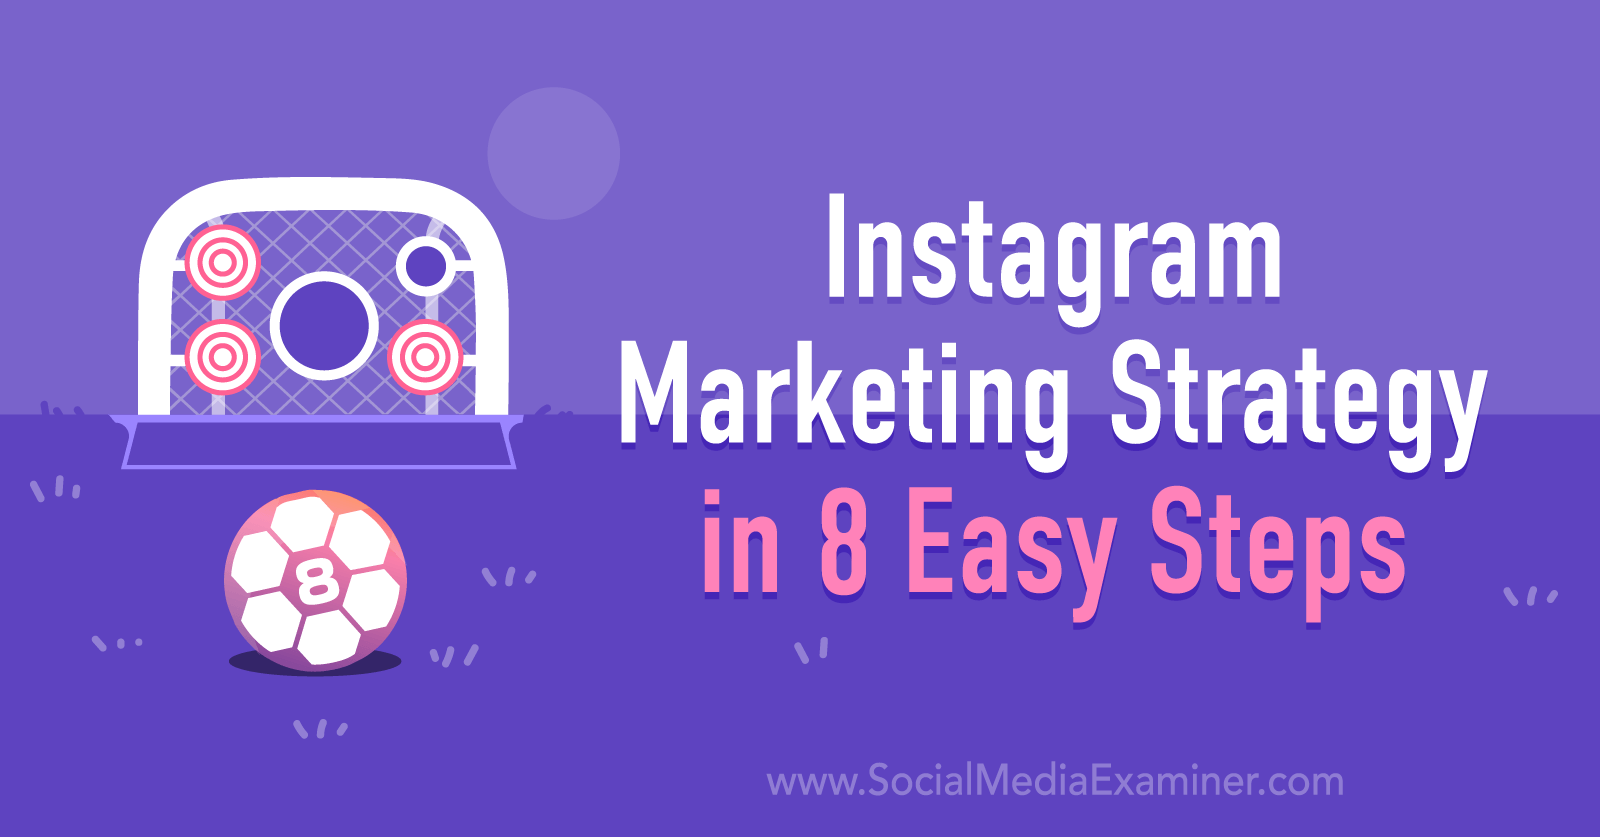 Boost your instagram marketing with strategic follower purchases